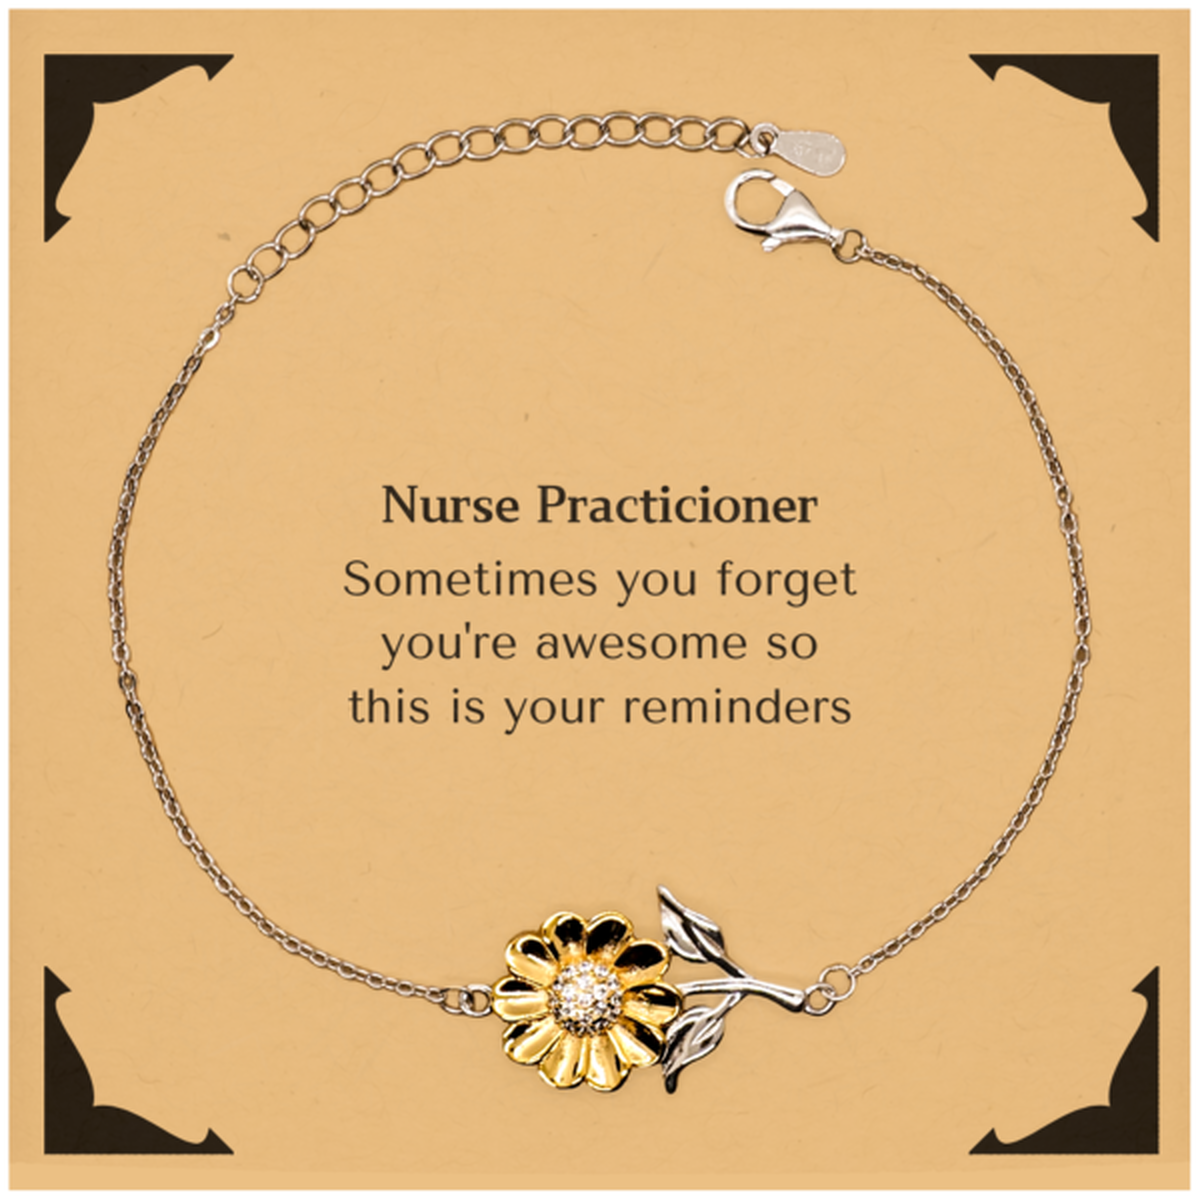 Sentimental Nurse Practicioner Sunflower Bracelet, Nurse Practicioner Sometimes you forget you're awesome so this is your reminders, Graduation Christmas Birthday Gifts for Nurse Practicioner, Men, Women, Coworkers